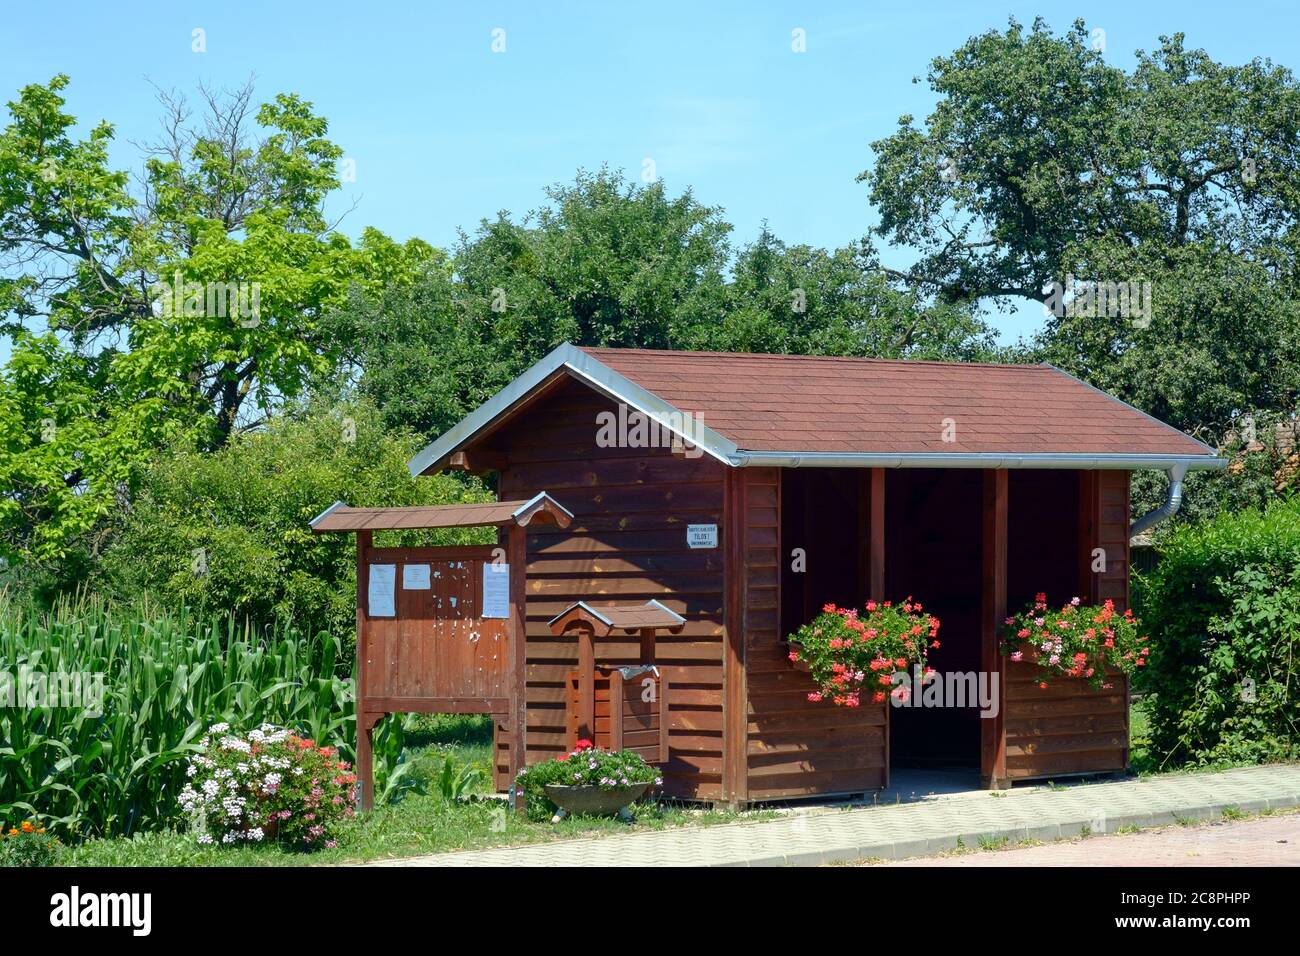 wooden bus shelter adorned with flowers in rural village zala county hungary Stock Photo